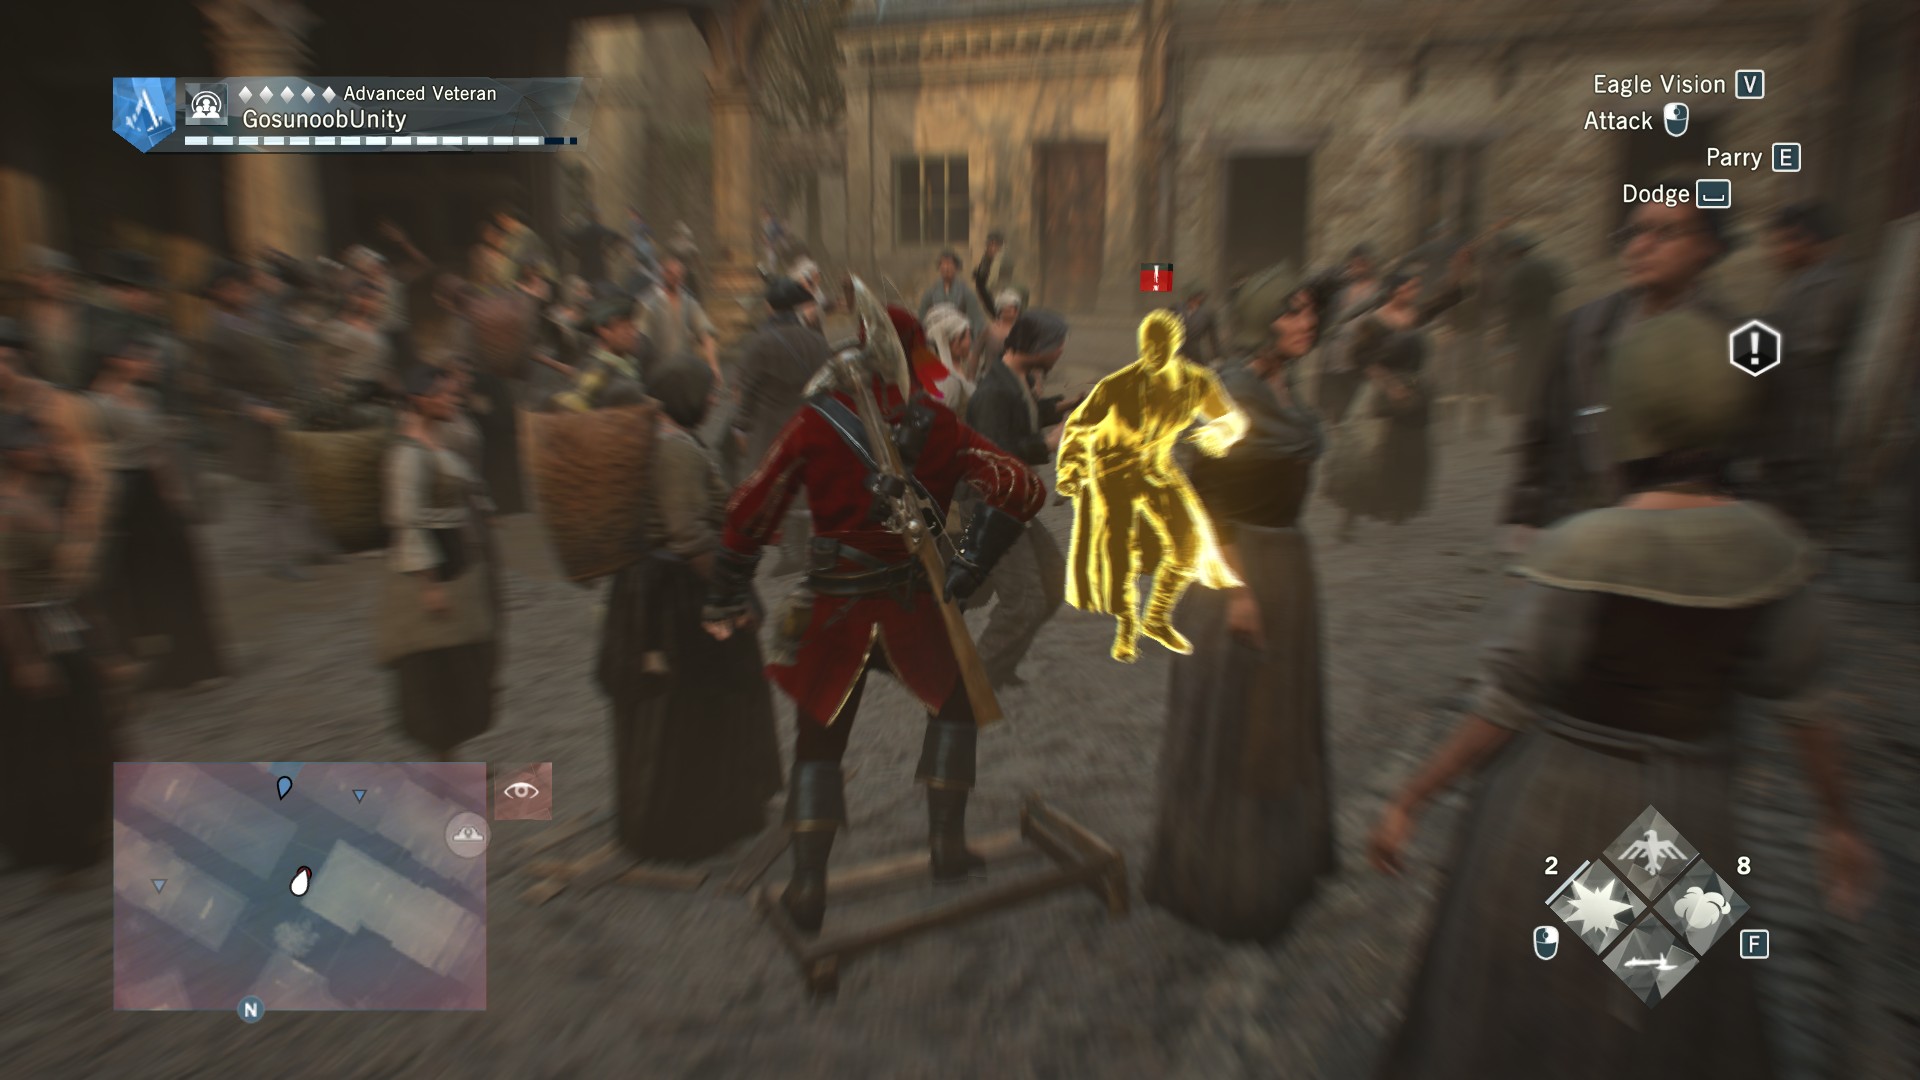 Assassin's Creed Unity Murder Mystery Guide + Location & Solution - Blind Justice ⧫◊◊◊◊ - DA82506